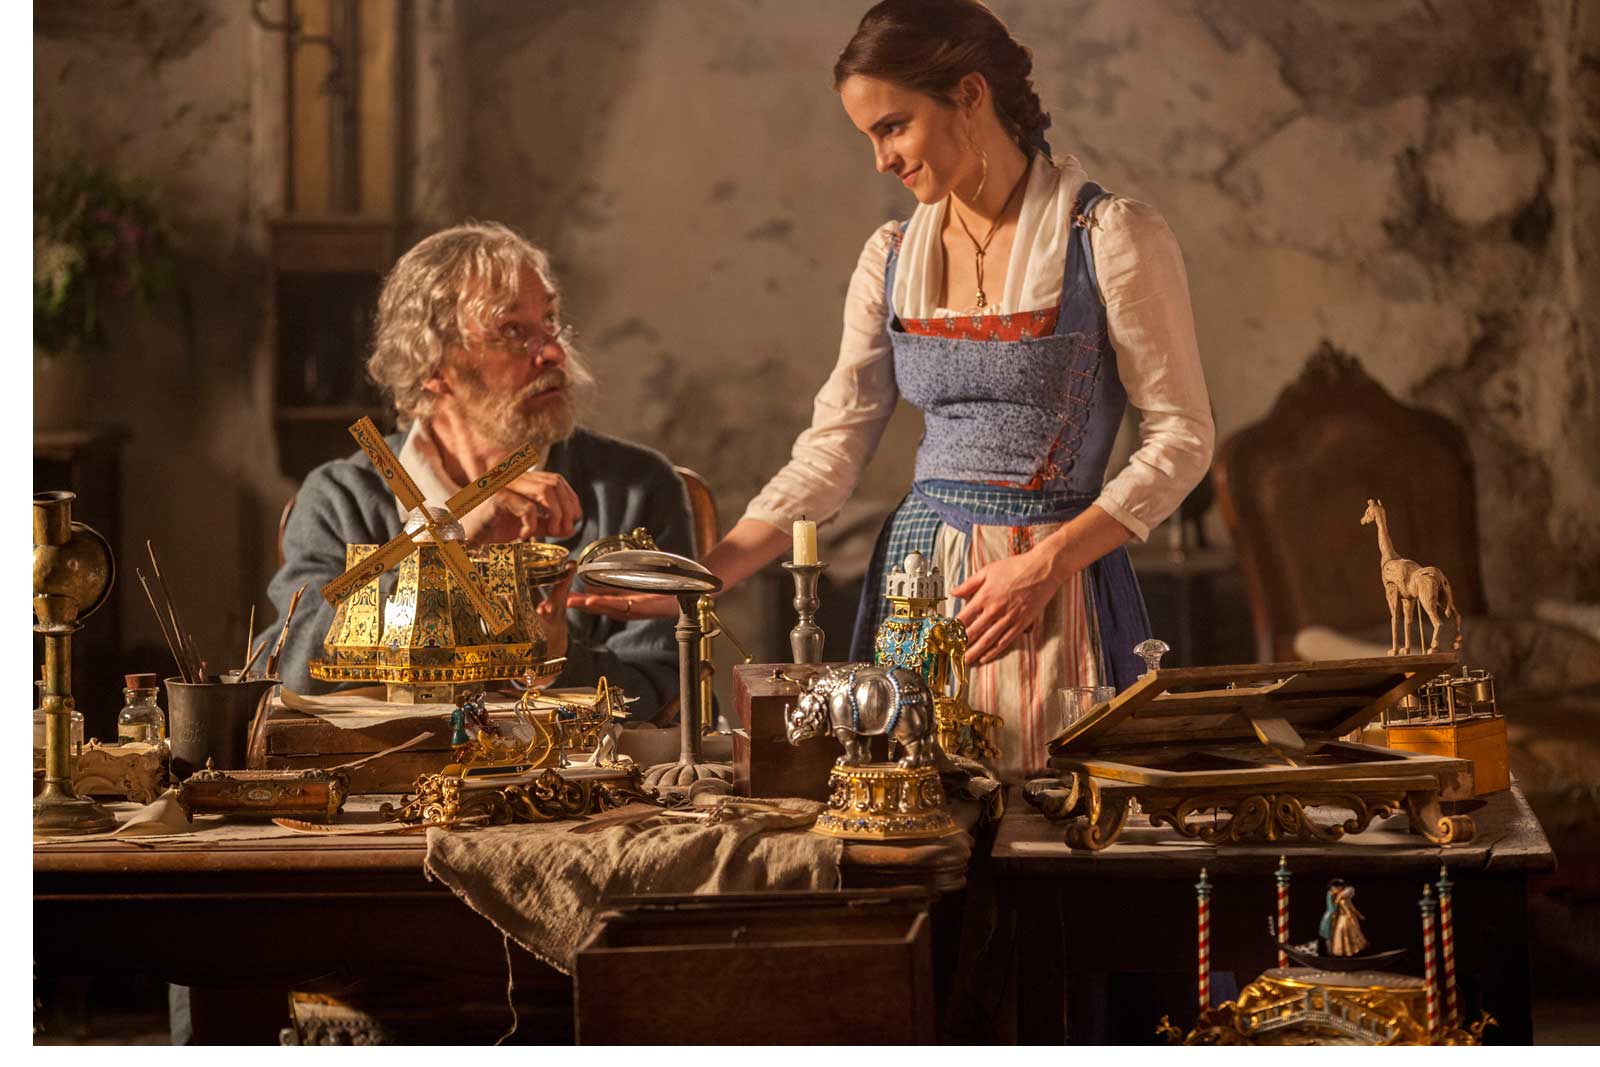 In Disney's BEAUTY AND THE BEAST, a live-action adaptation of the studio's animated classic, Emma Watson stars as Belle and Kevin Kline is Maurice, Belle's father.  The story and characters audiences know and love are brought to life in this stunning cinematic event...a celebration of one of the most beloved tales ever told.